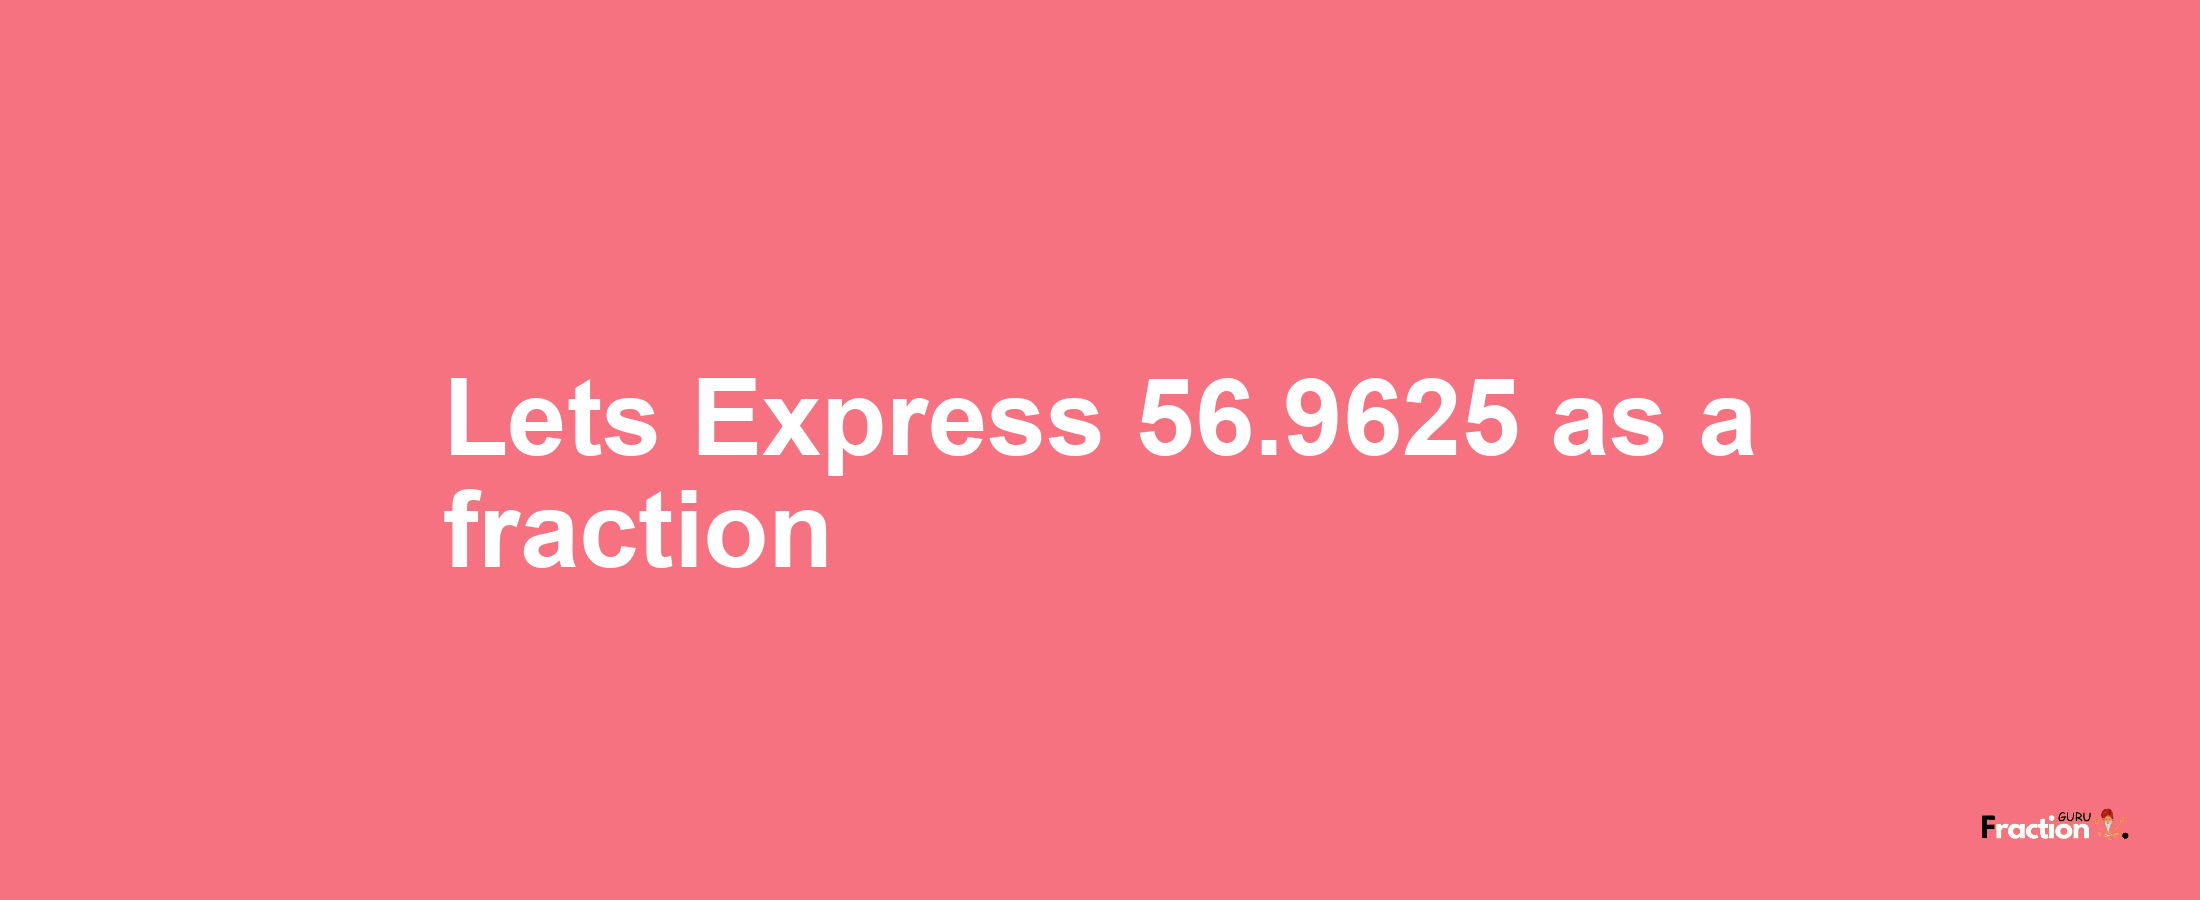 Lets Express 56.9625 as afraction